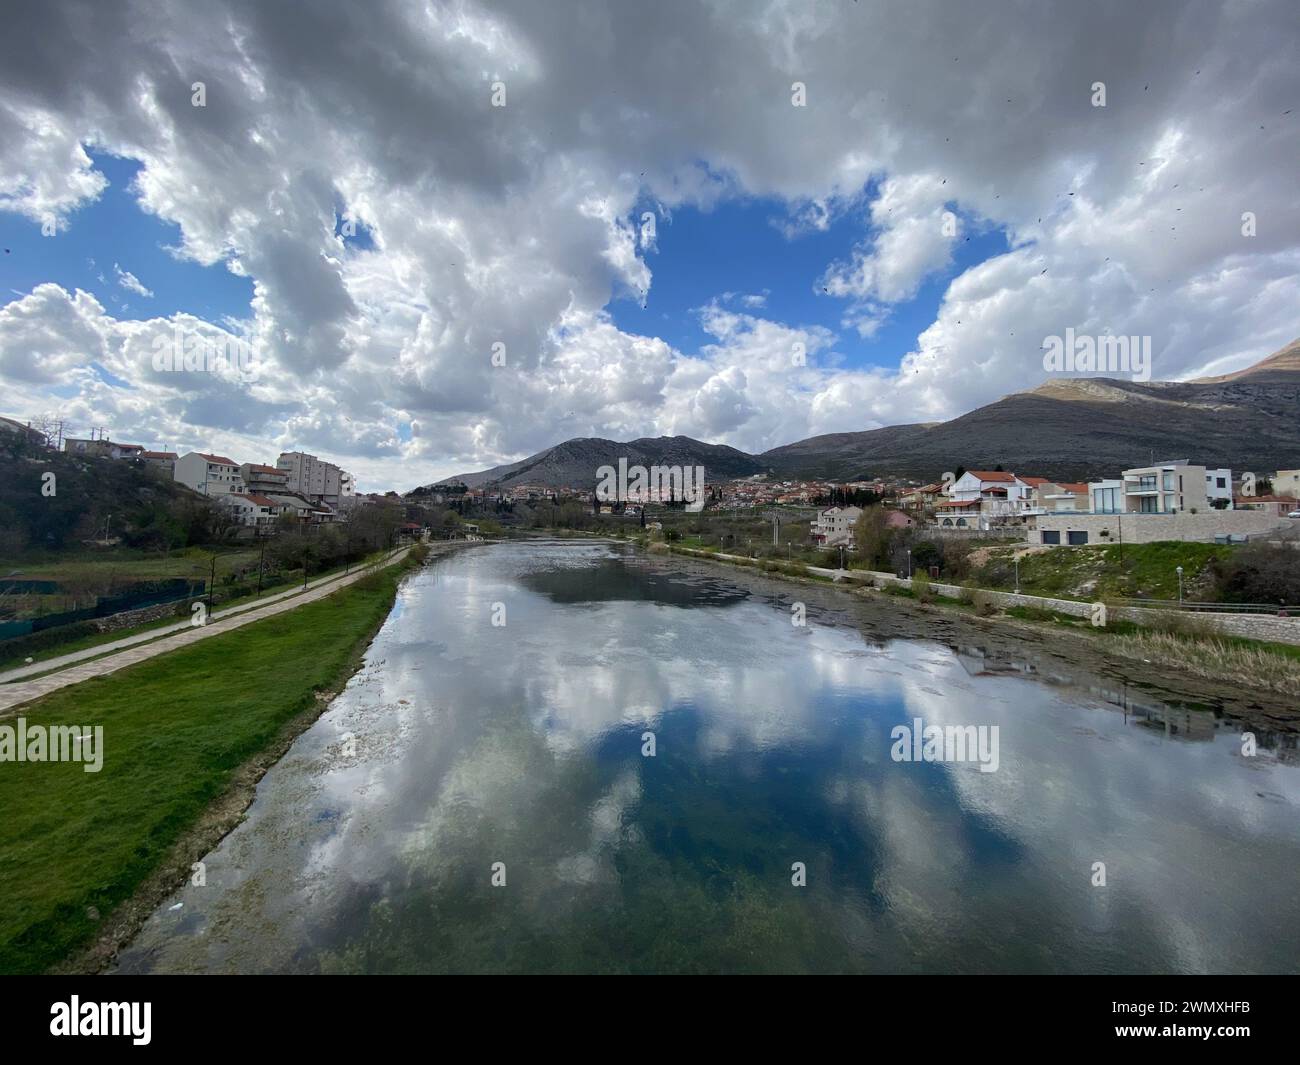 Riverside Illusions: The Sky's Choreography Mirrored in the Water Stock Photo